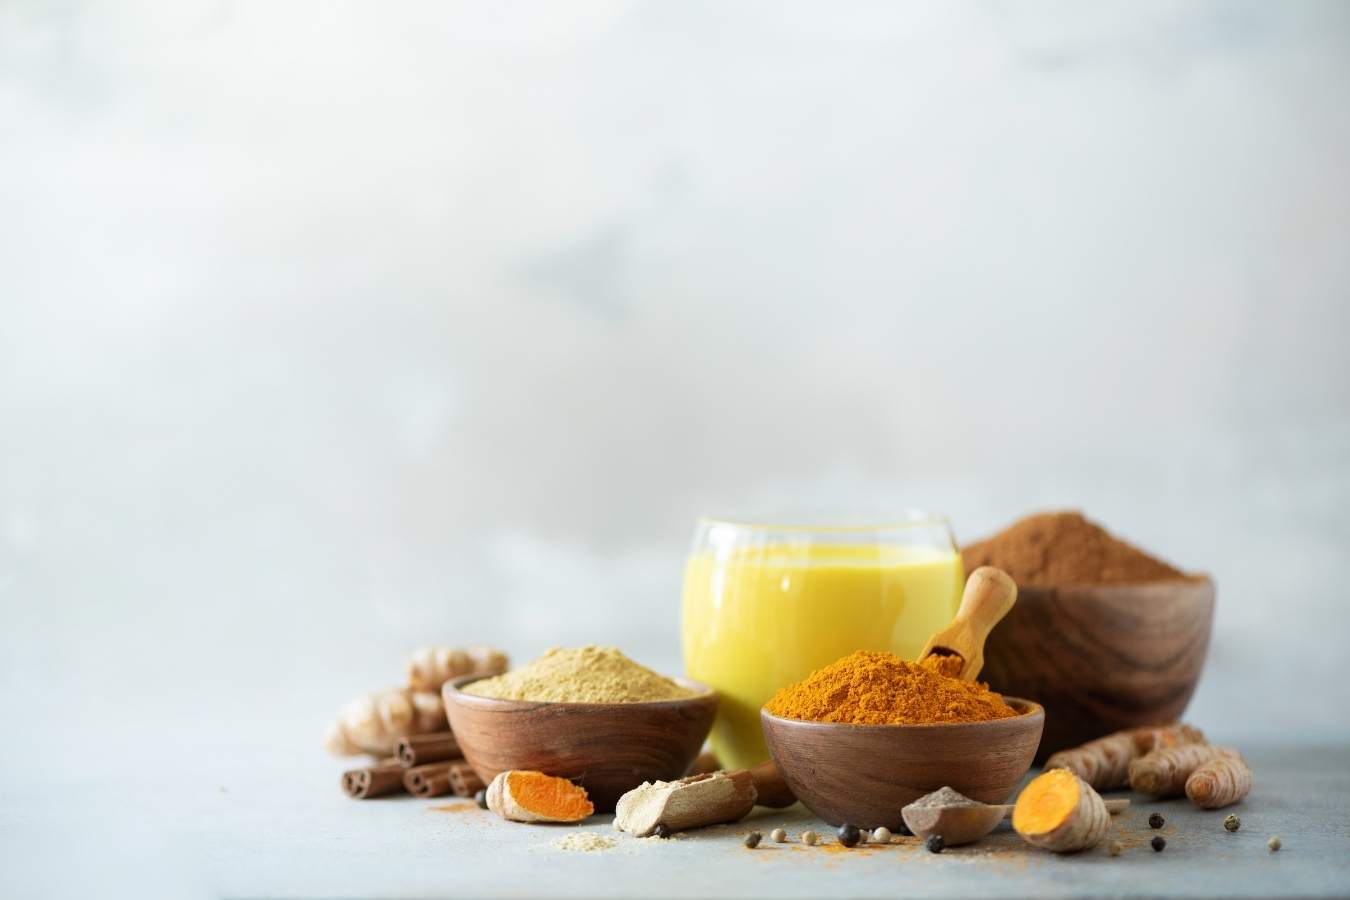 Who Should Not Use Turmeric For Their Hair